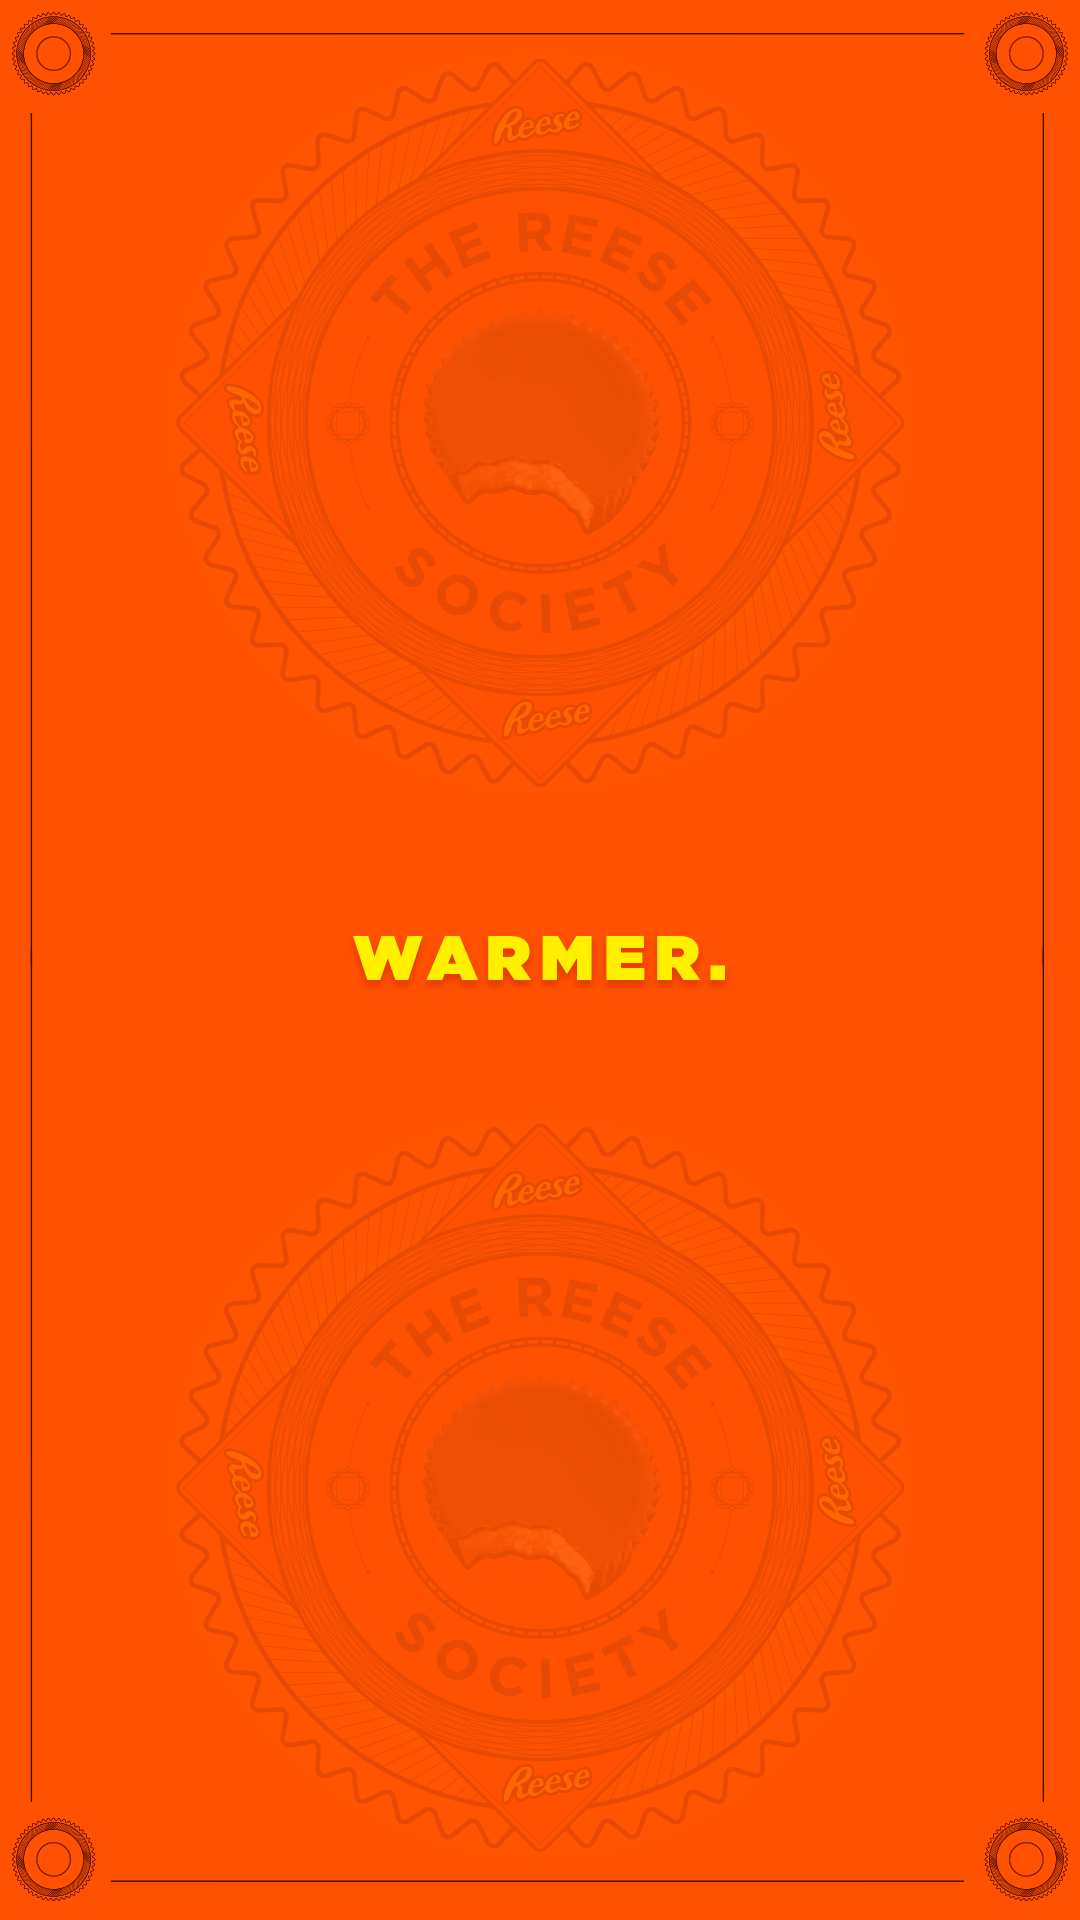 Reese-Society-IG_0052_Warmer.png